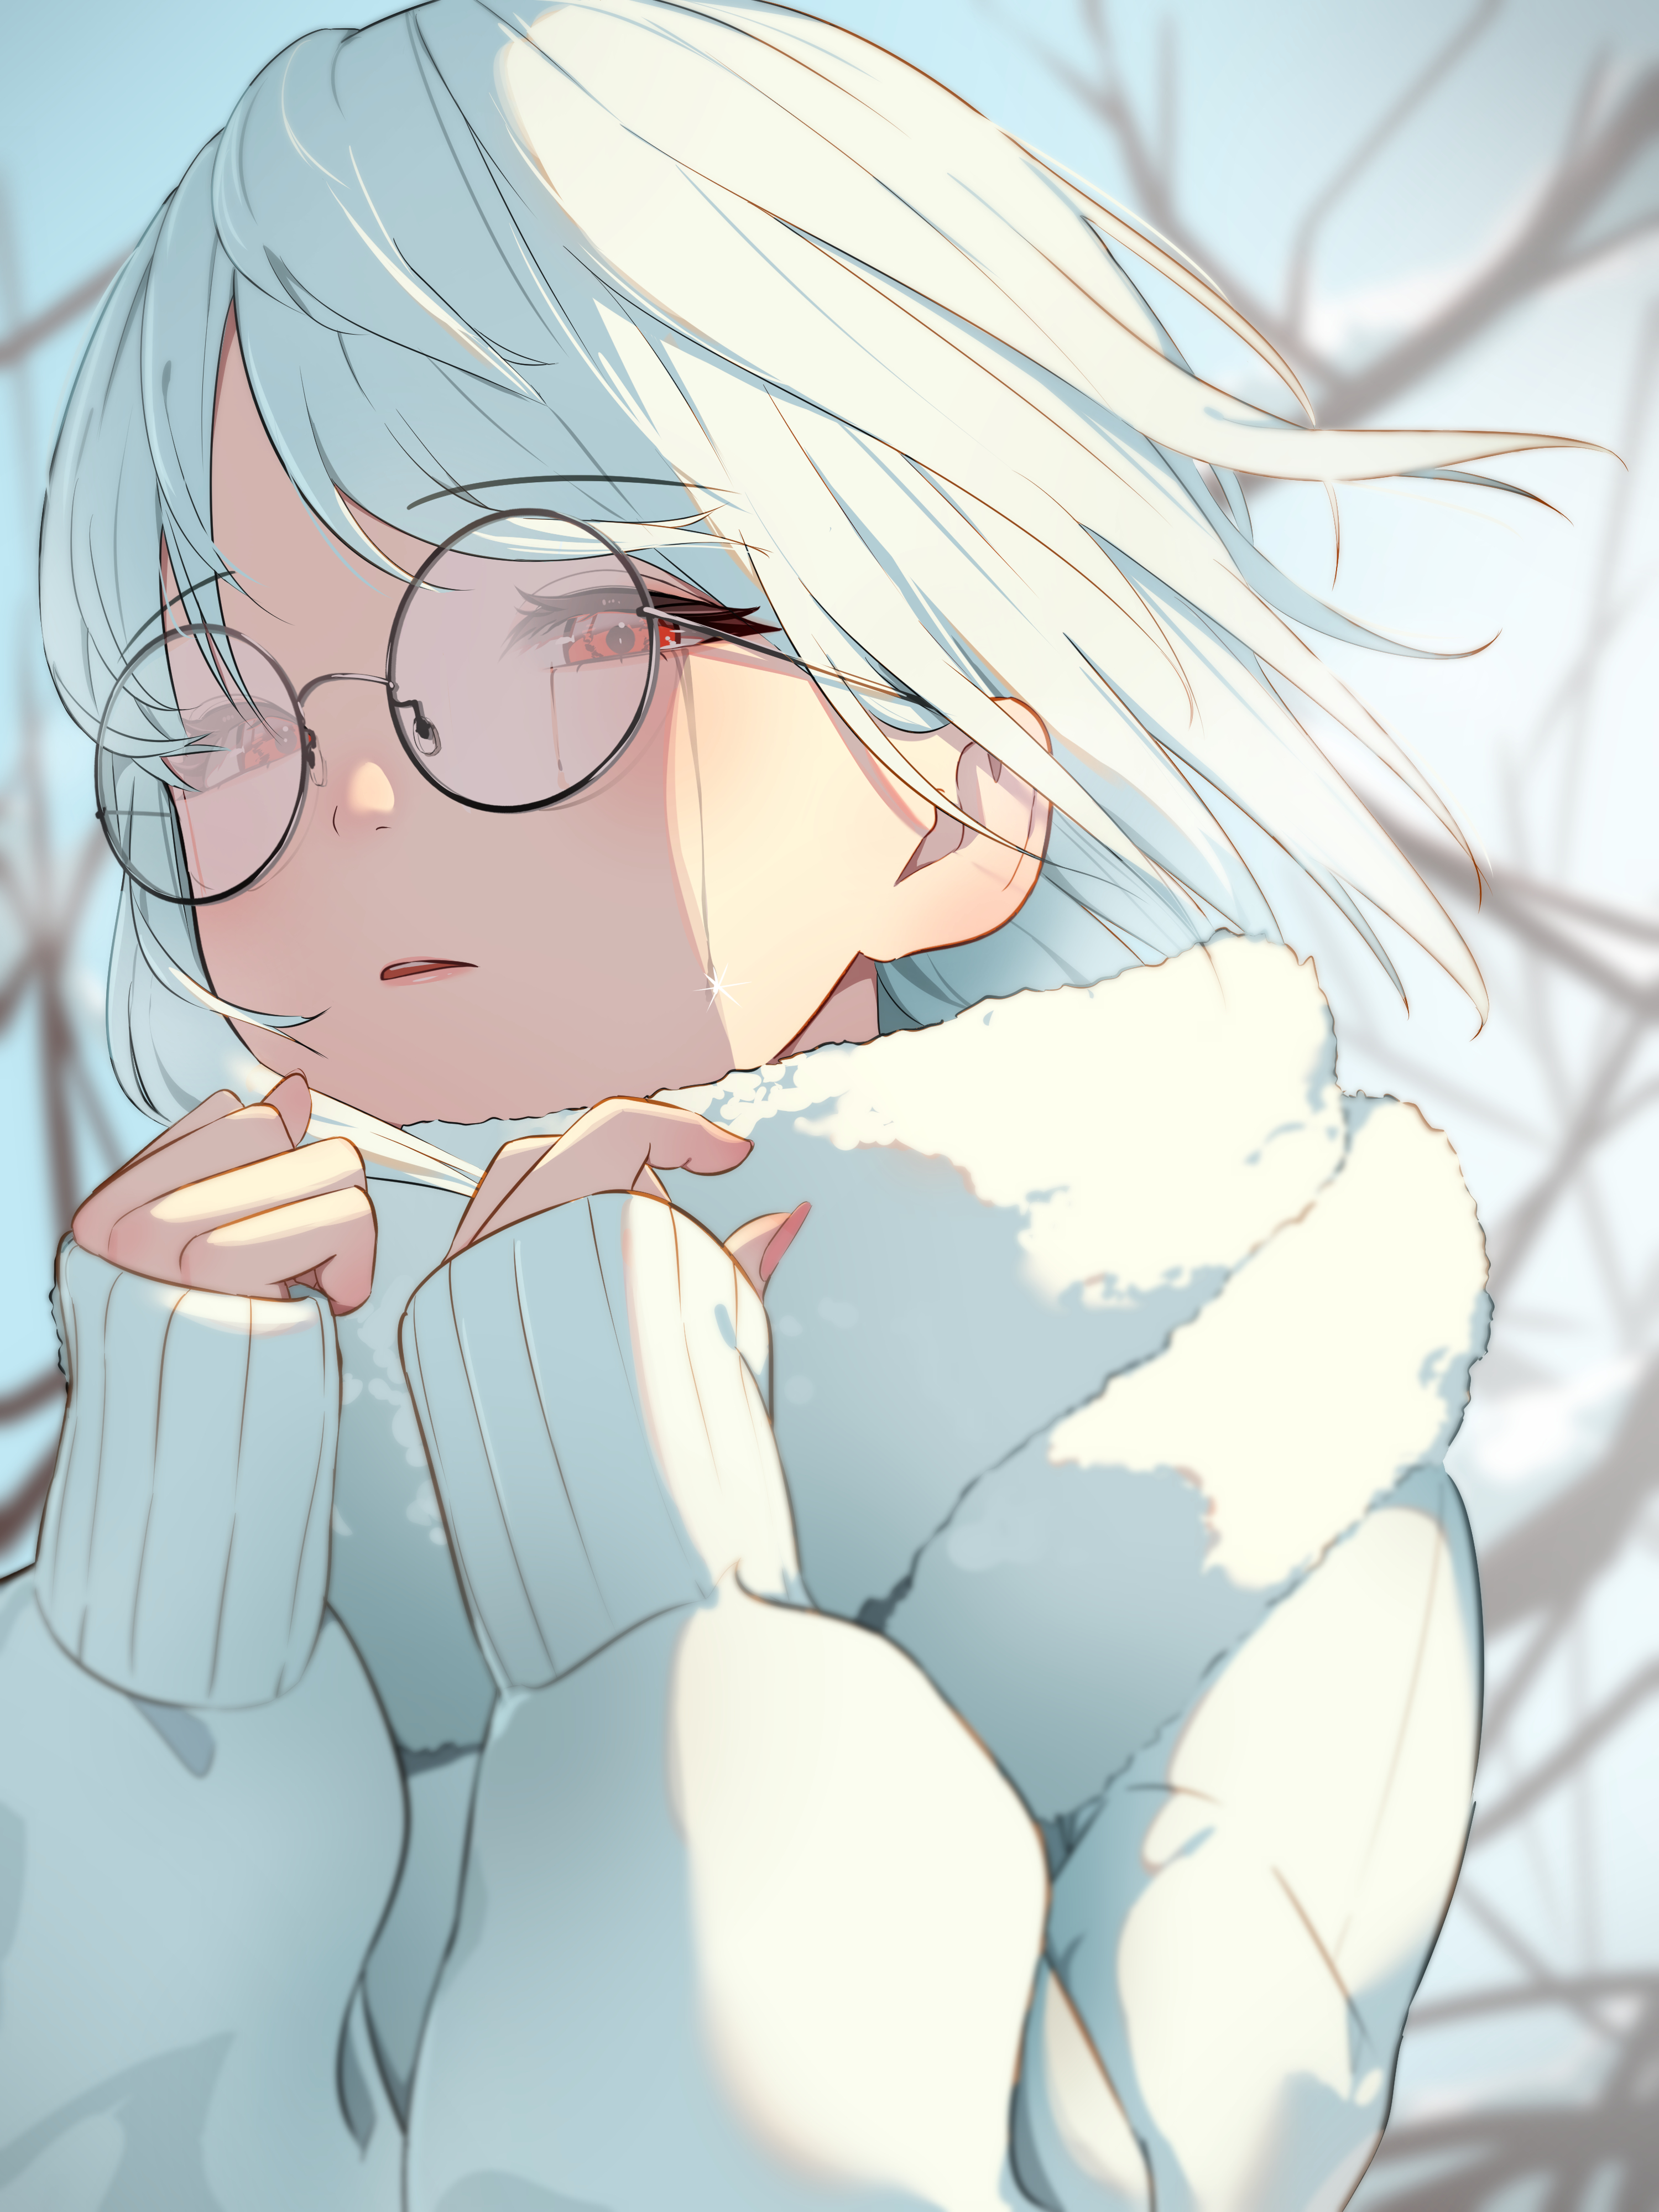 Anime 3000x4000 anime anime girls cold winter jacket glasses white hair red eyes looking away white clothing crying